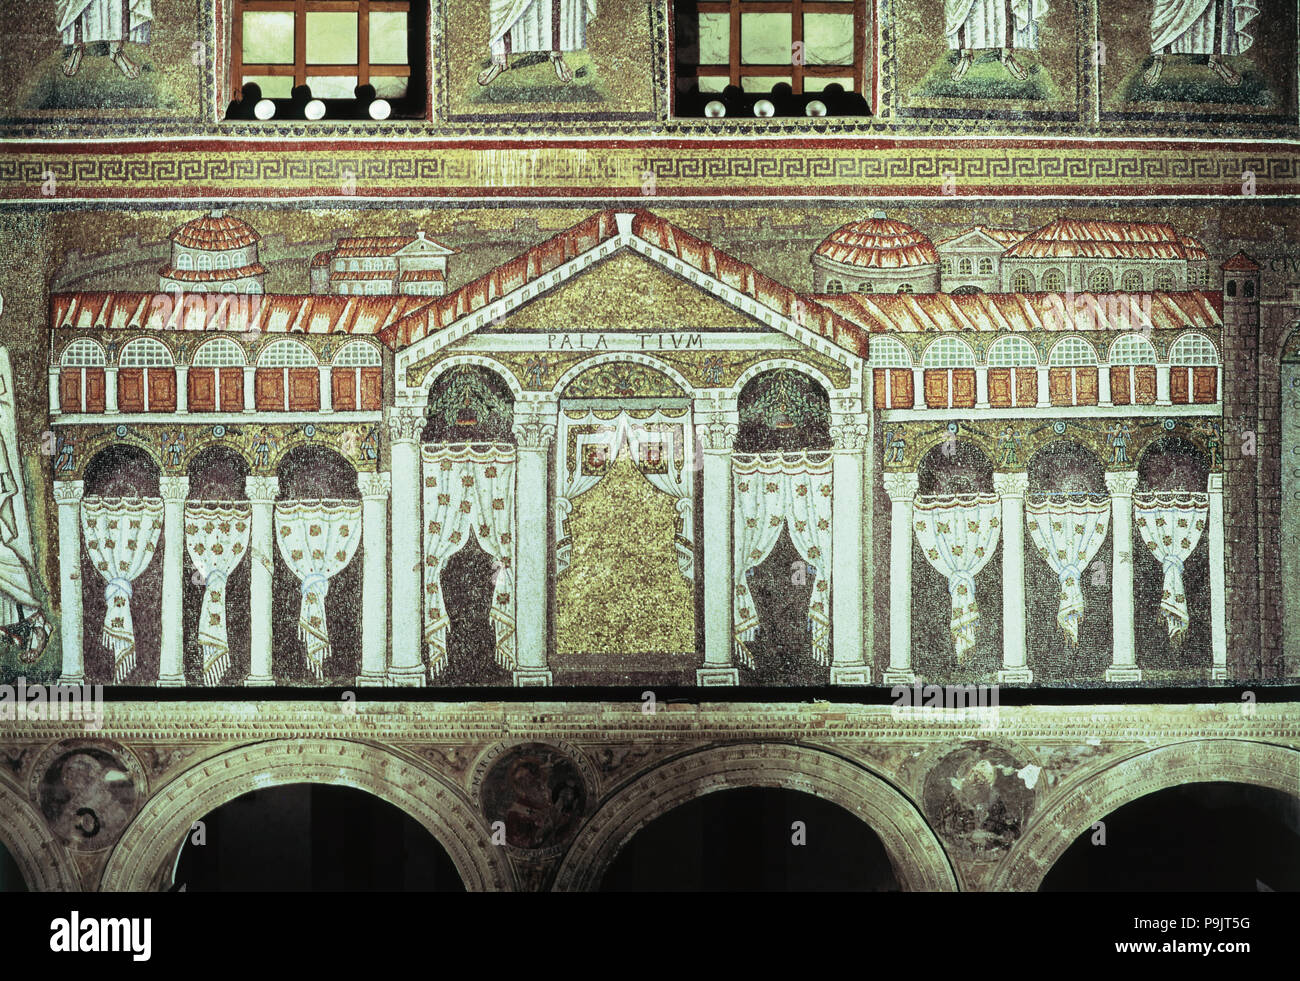 Mosaic representing the palace of Theodoric in San Apollinaire Nuovo, Ravenna. Stock Photo